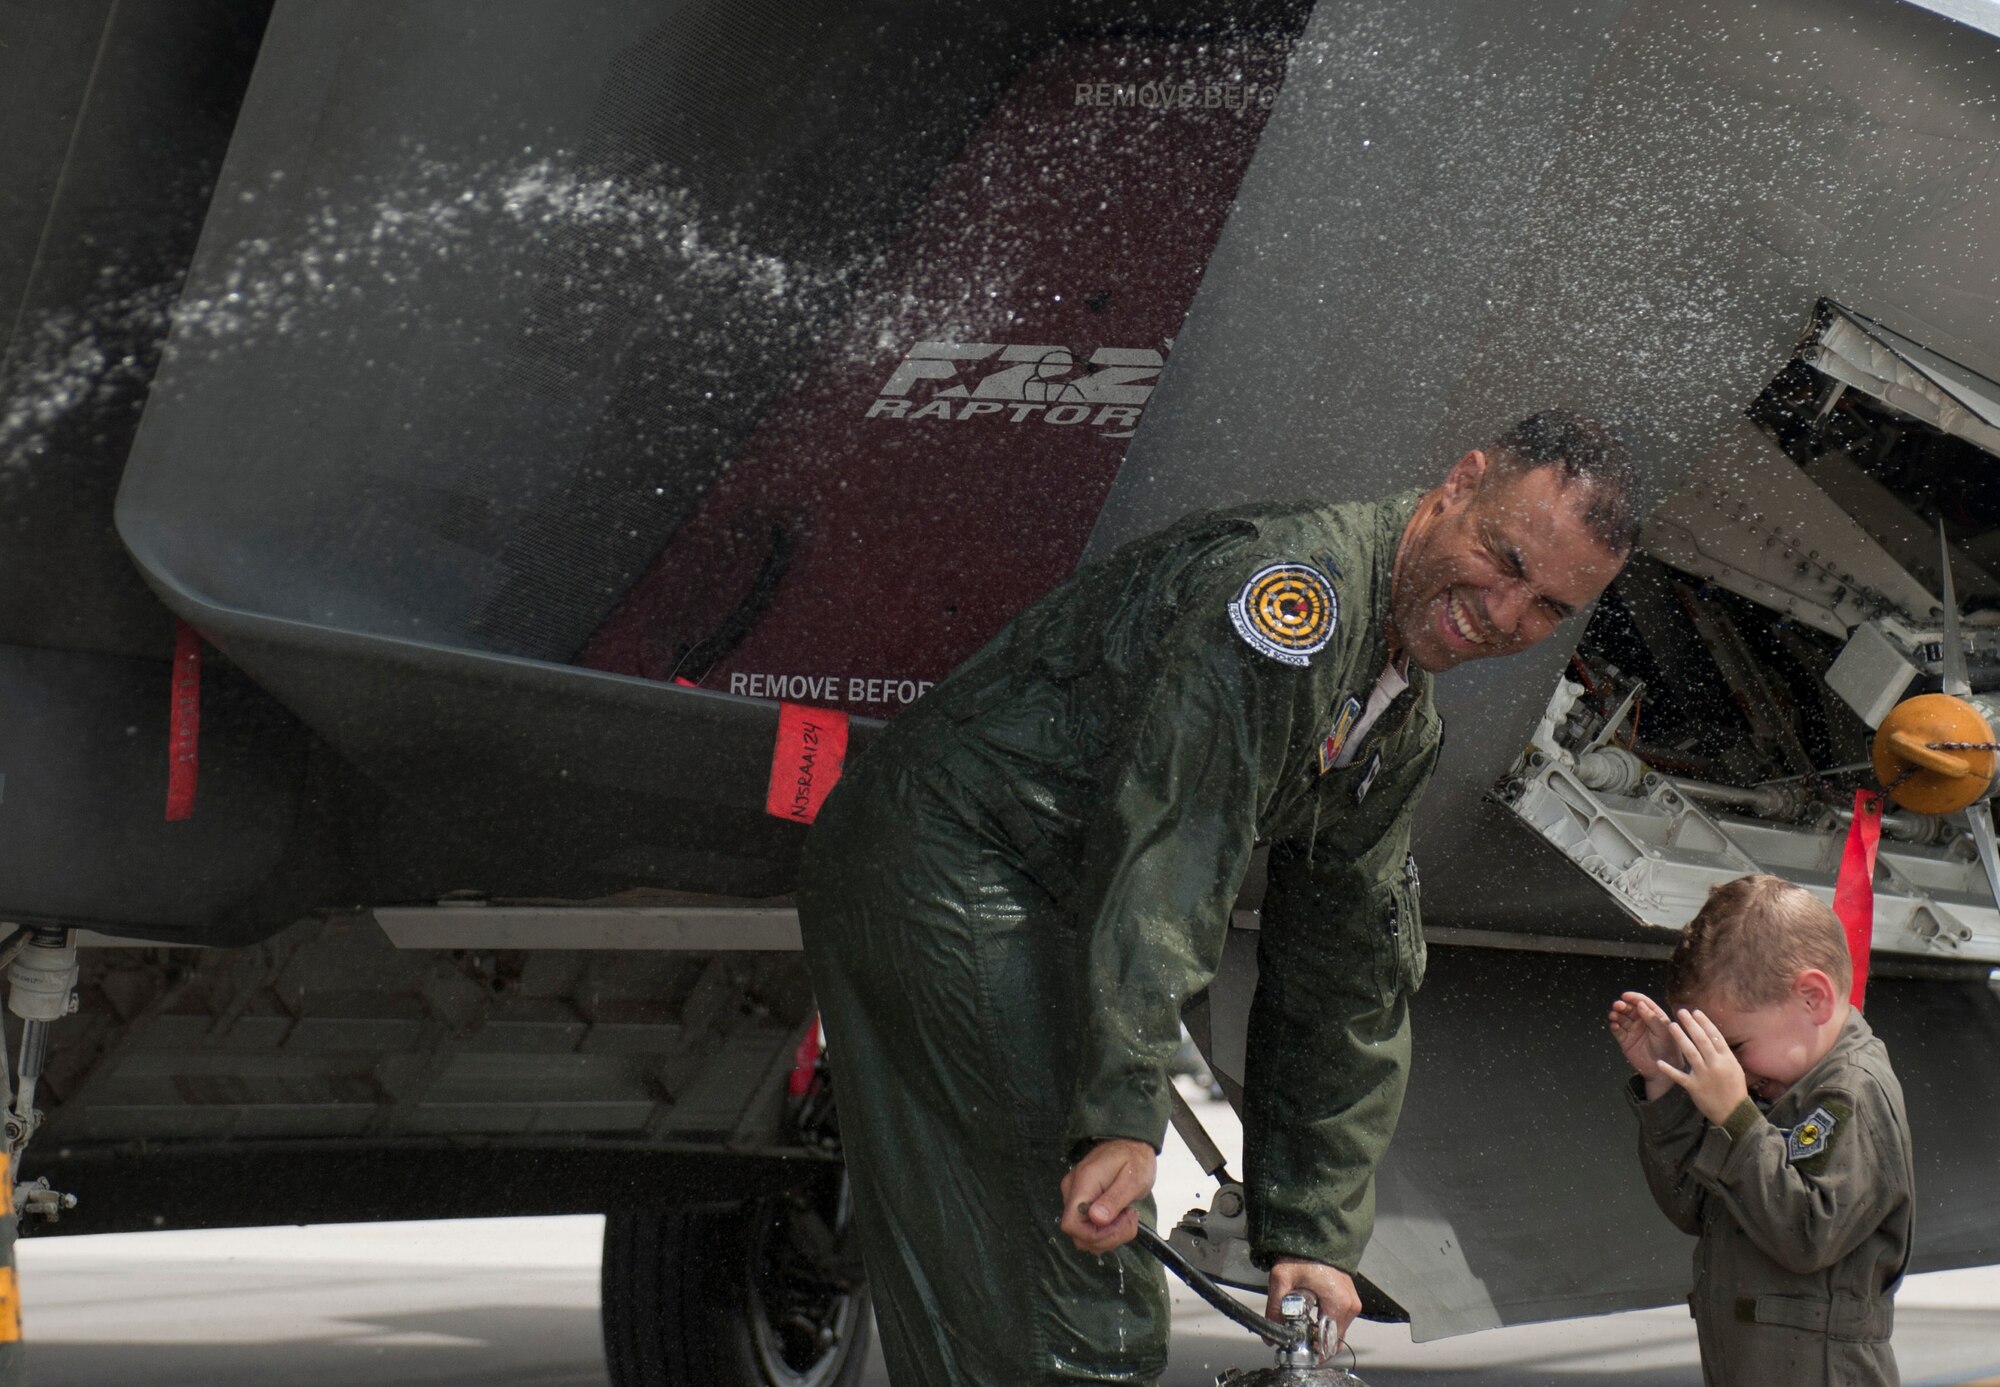 Col. Adrian Spain, U.S. Air Force Weapons School commandant, laughs with his son while being hosed down after his final flight as the USAFWS commandant at Nellis Air Force Base, Nev., May 11, 2015. Spain, who has served at Nellis AFB since June 2013, will take over as commander of the 53rd Wing at Eglin AFB, Fla. (U.S. Air Force photo by Airman 1st Class Mikaley Towle)